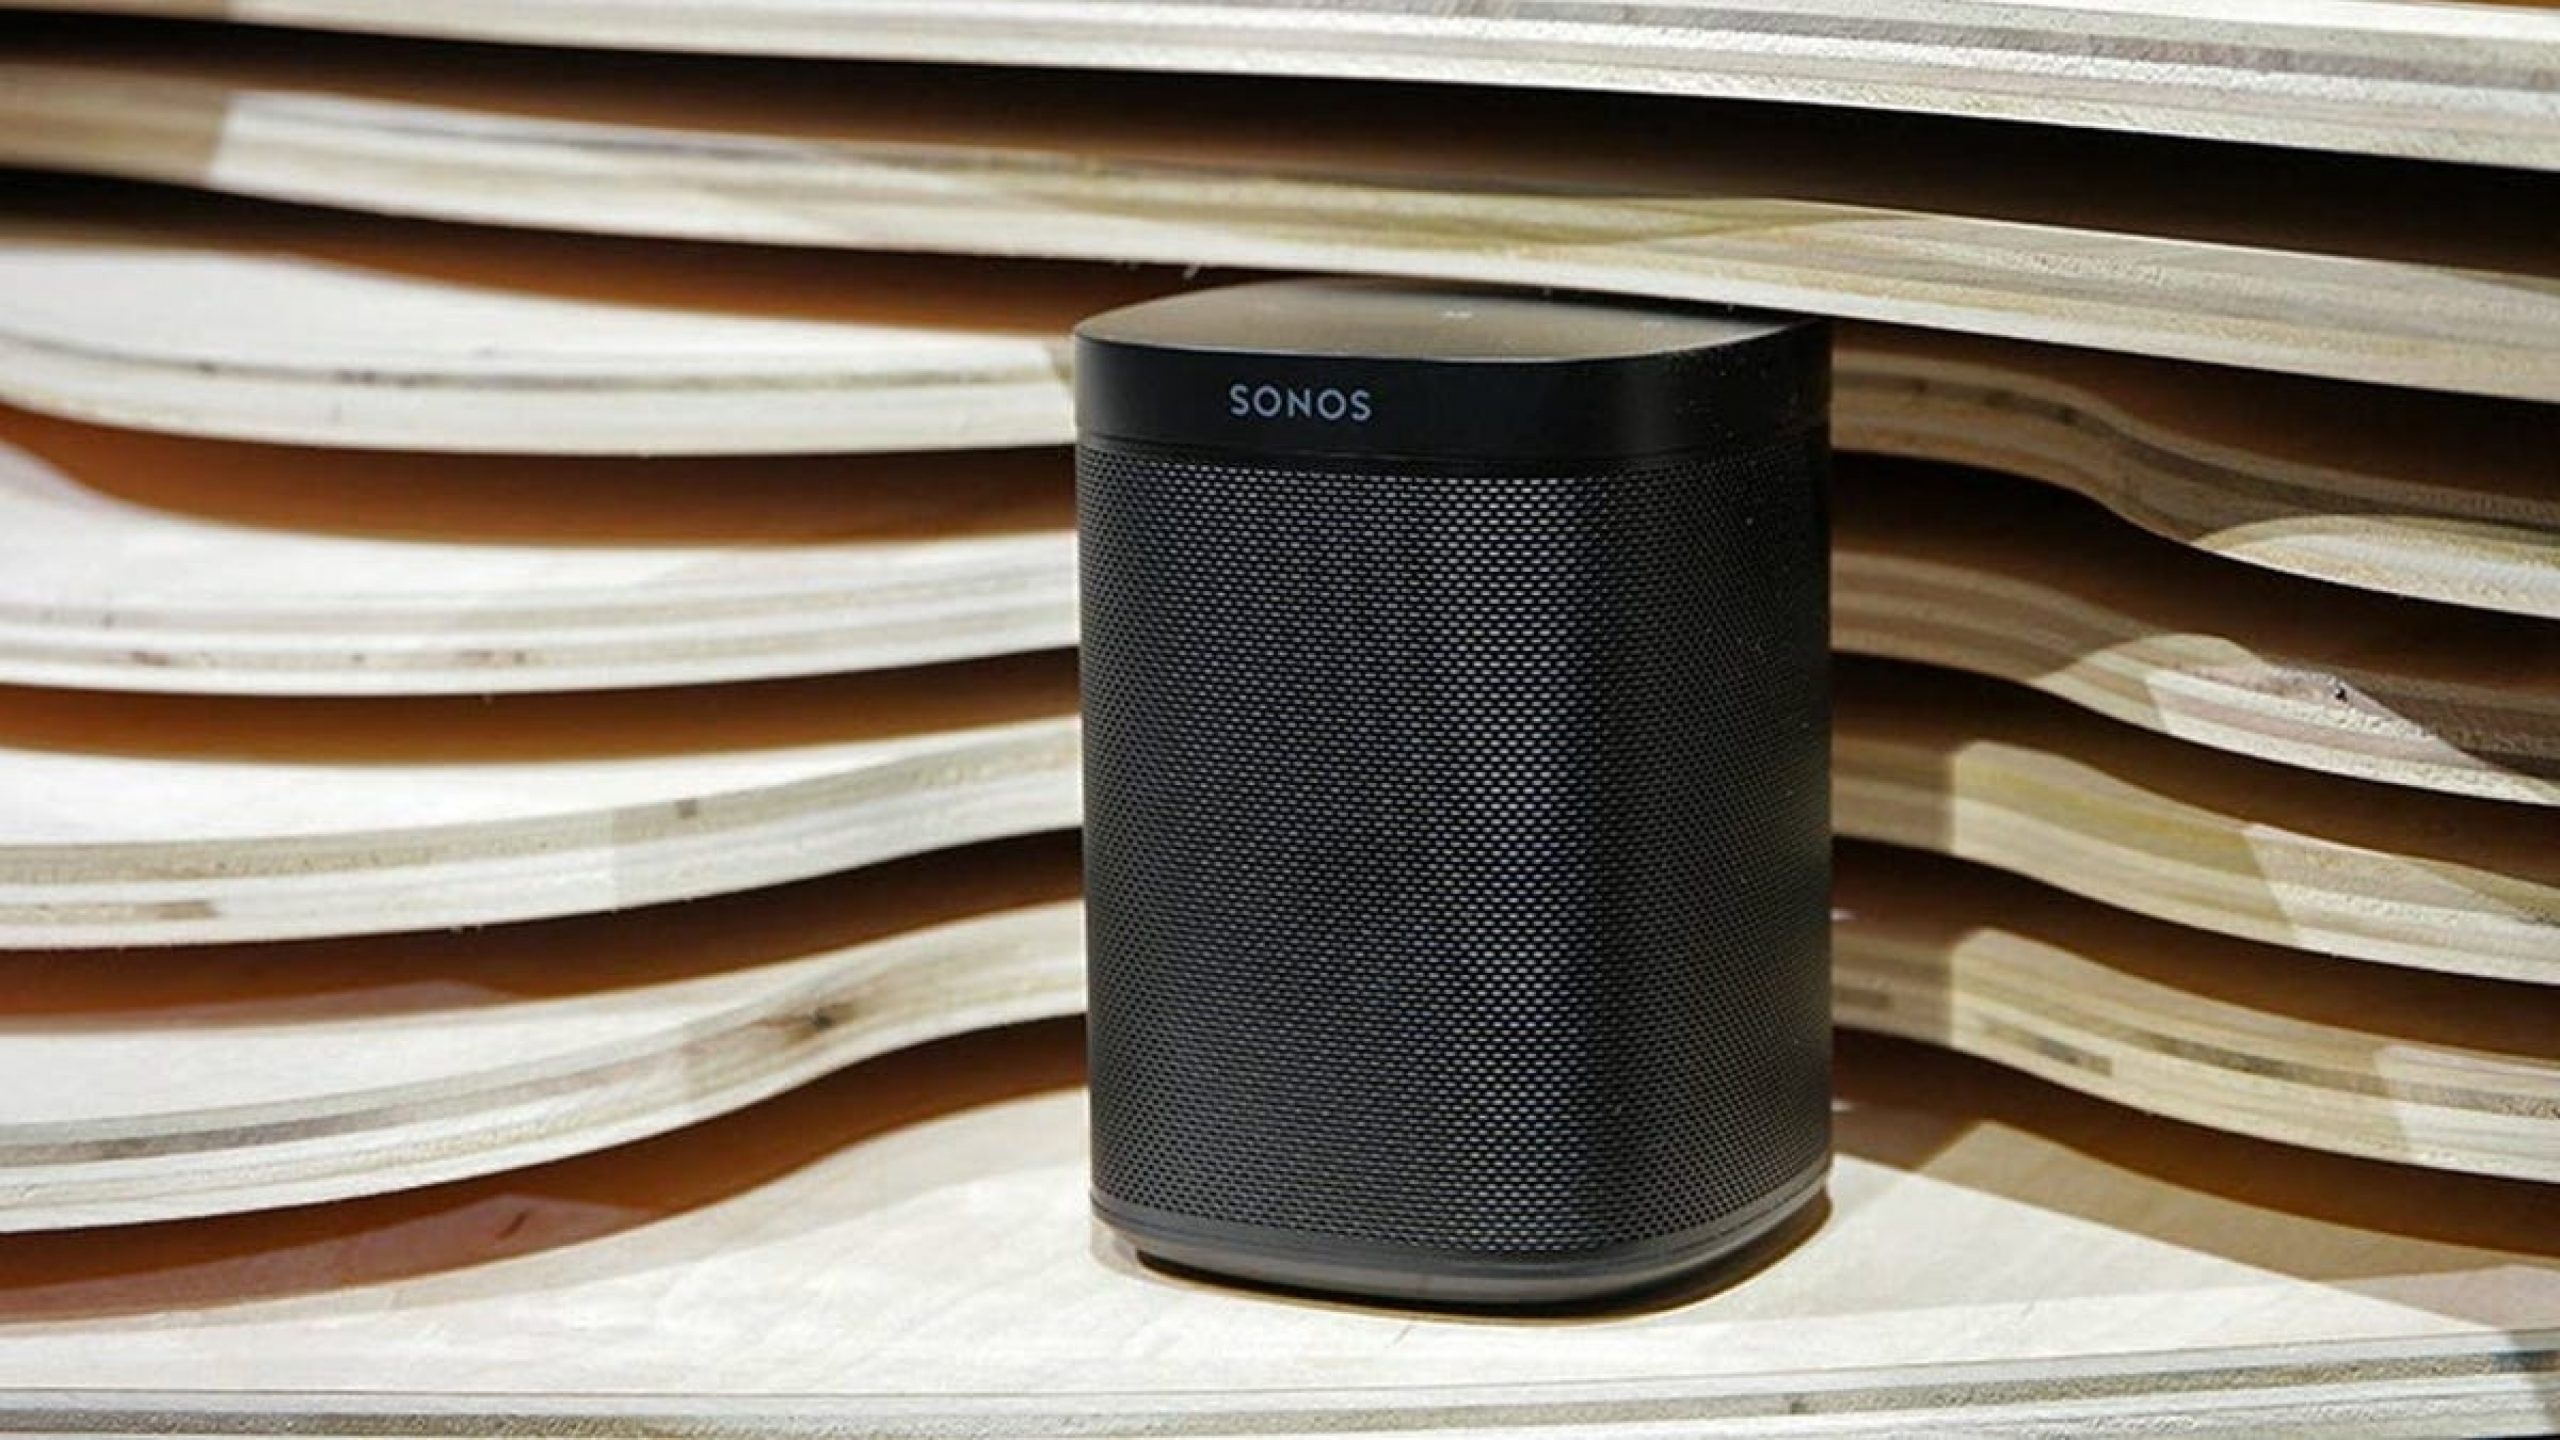 The New Sonos One SL Is a Reminder That Smart Devices Have a Short Shelf Life